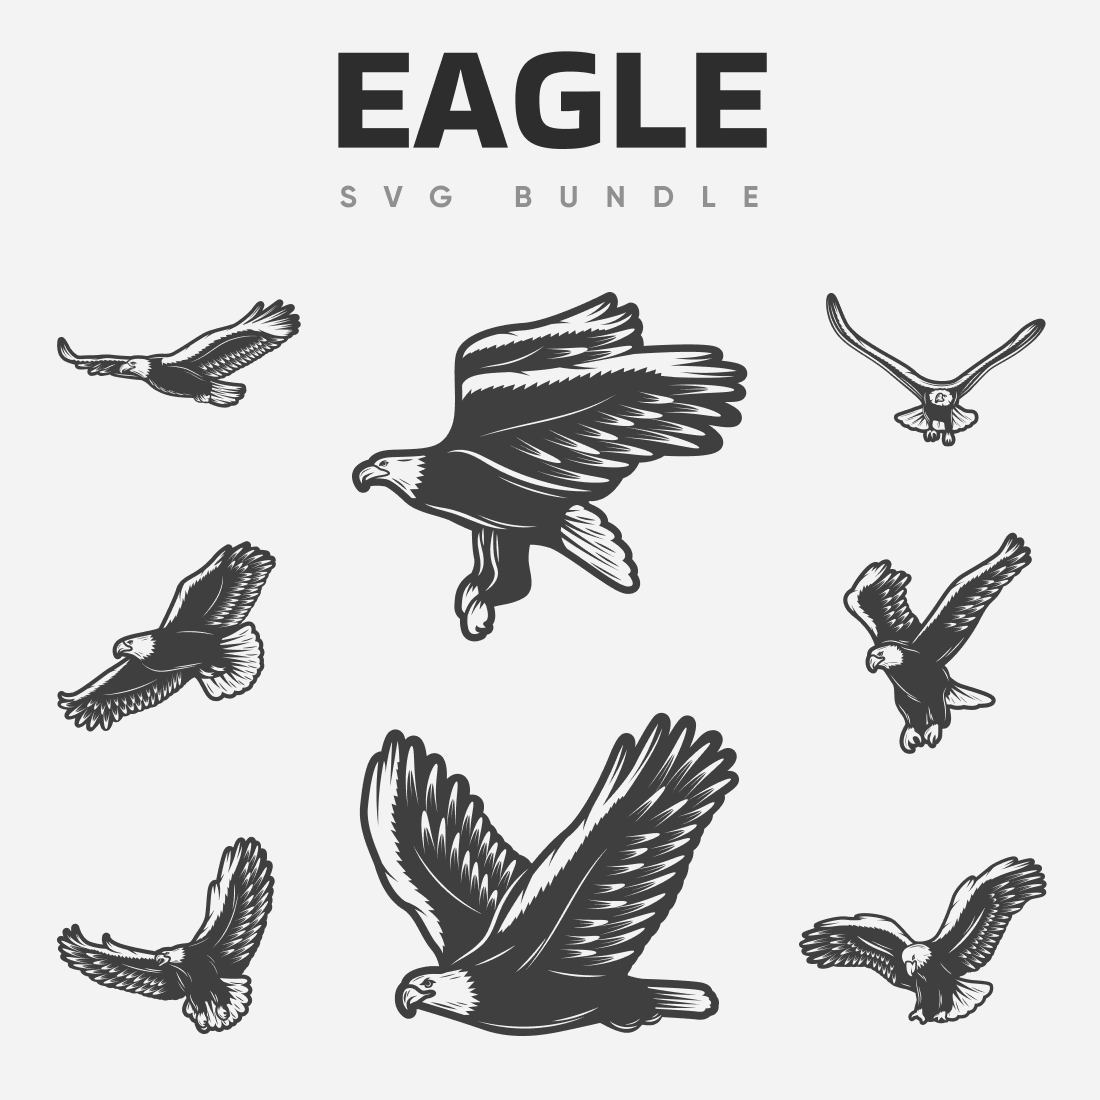 The eagle svg bundle is shown in black and white.